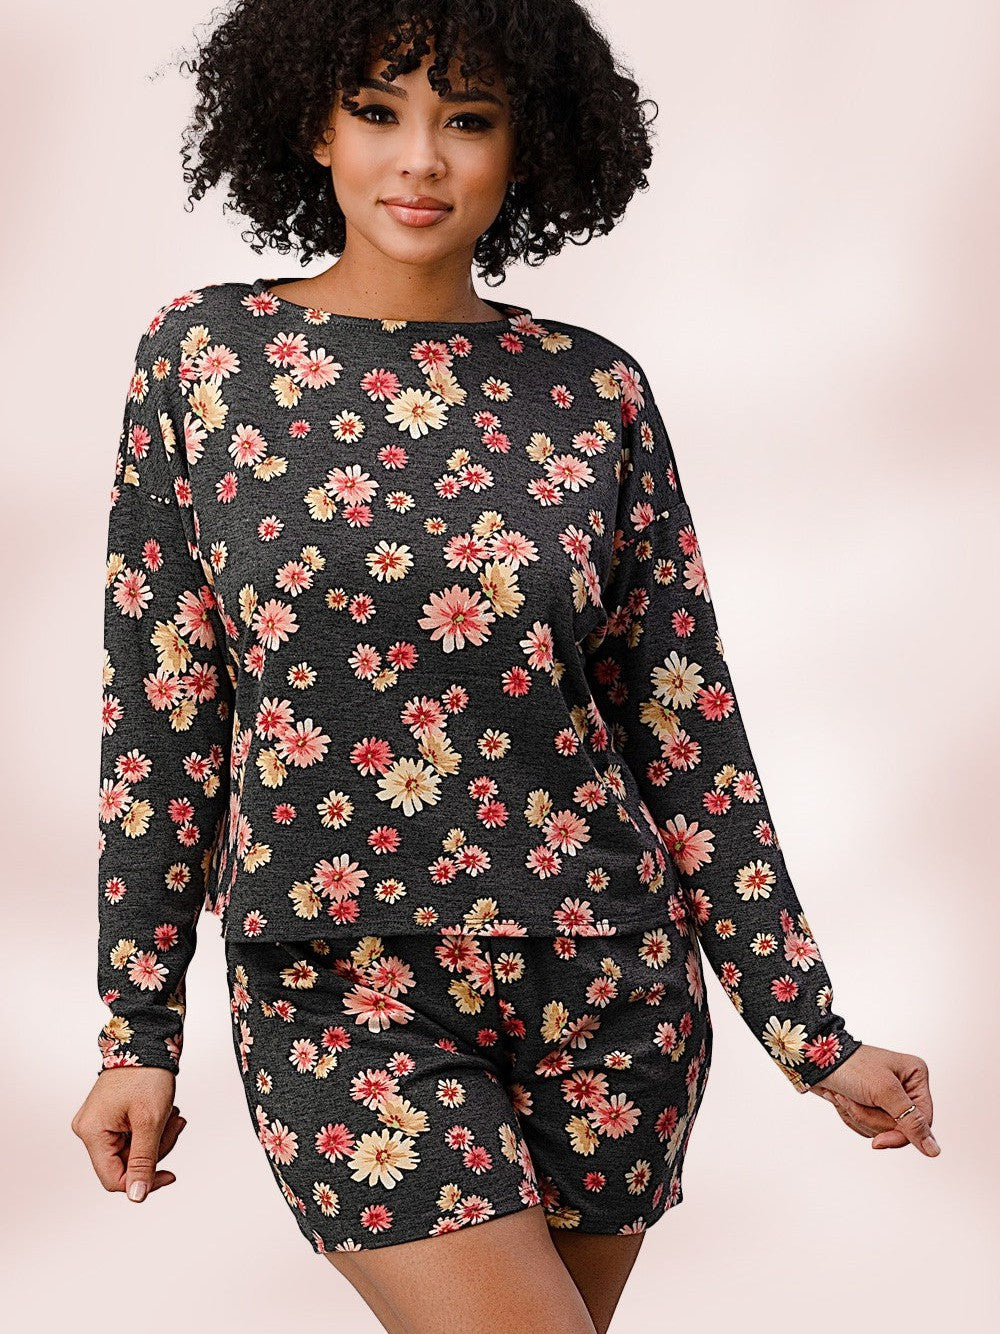 Never Stop Dreaming Long Sleeve Top + Shorts Floral Pajamas-Women's Clothing-Shop Z & Joxa